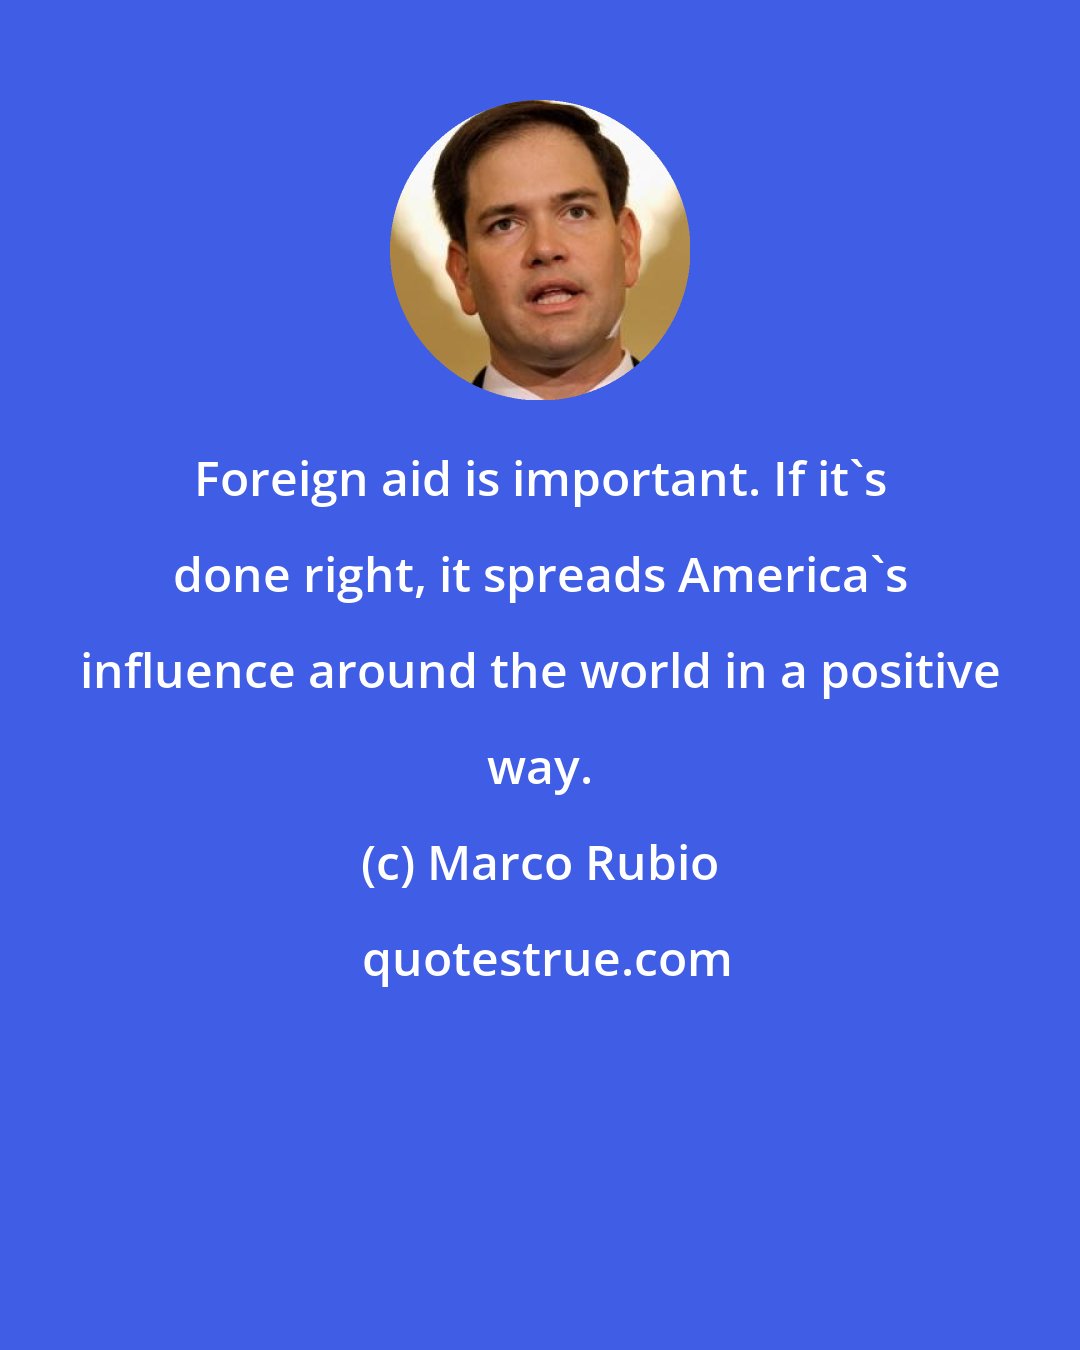 Marco Rubio: Foreign aid is important. If it's done right, it spreads America's influence around the world in a positive way.